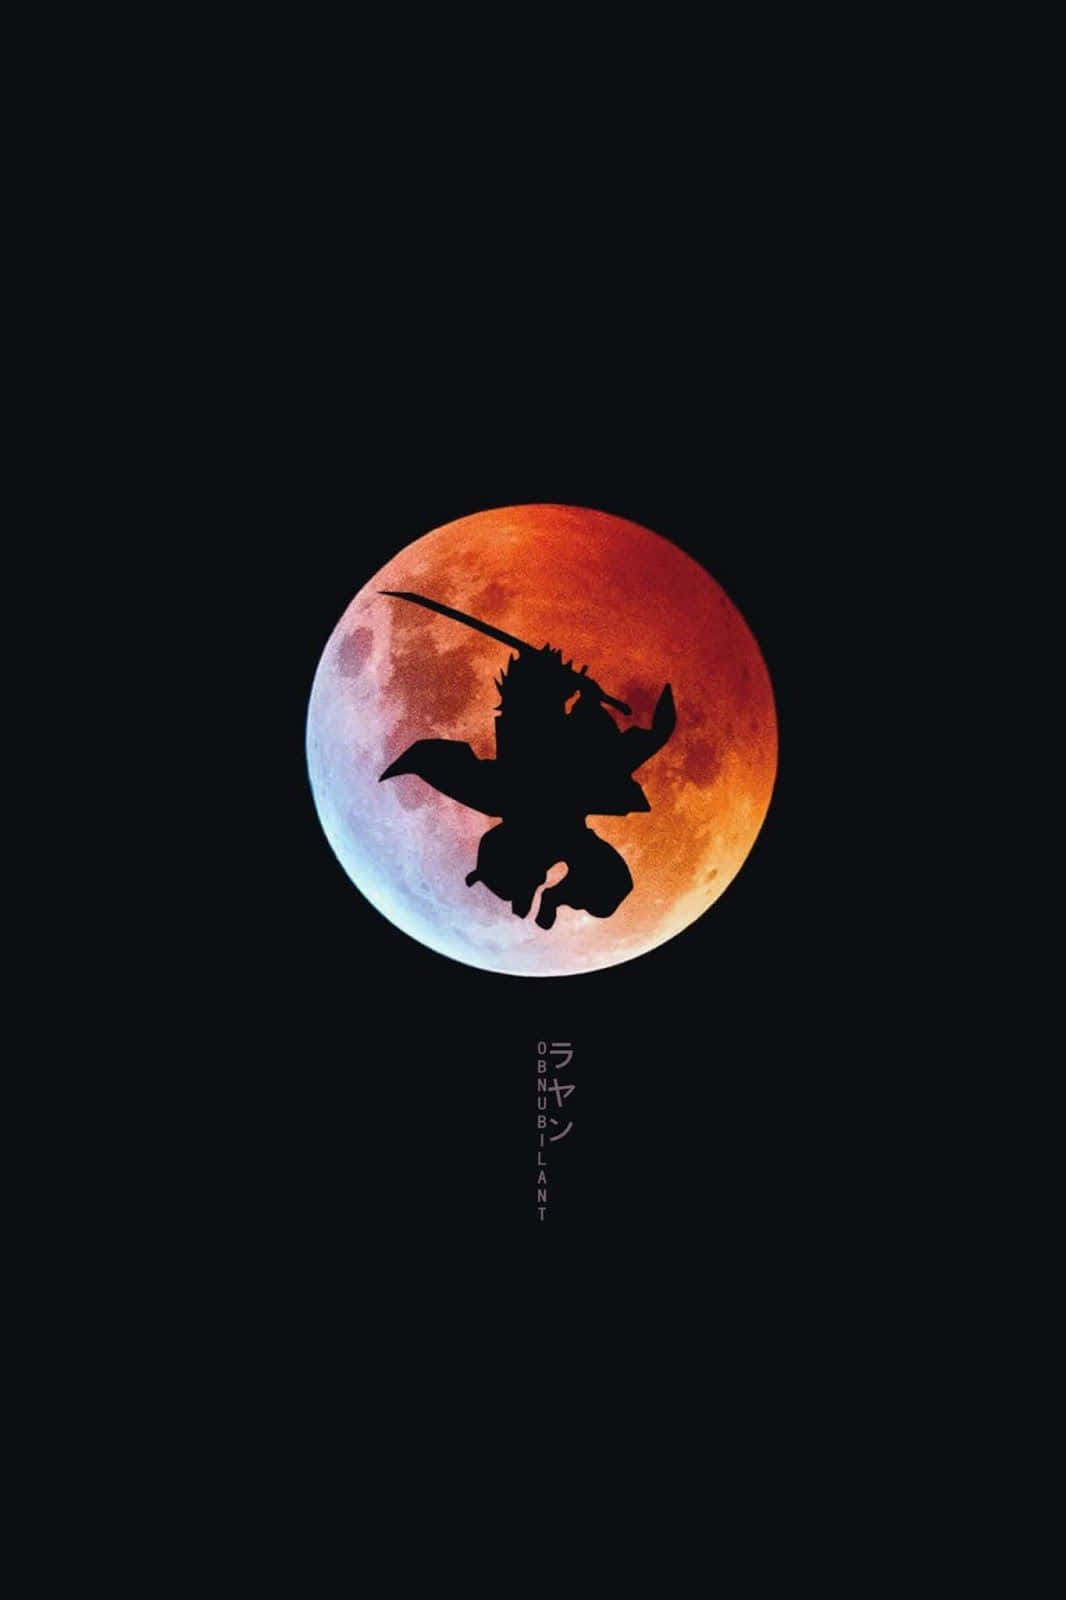 A Silhouette Of A Man With A Sword In Front Of A Full Moon Wallpaper